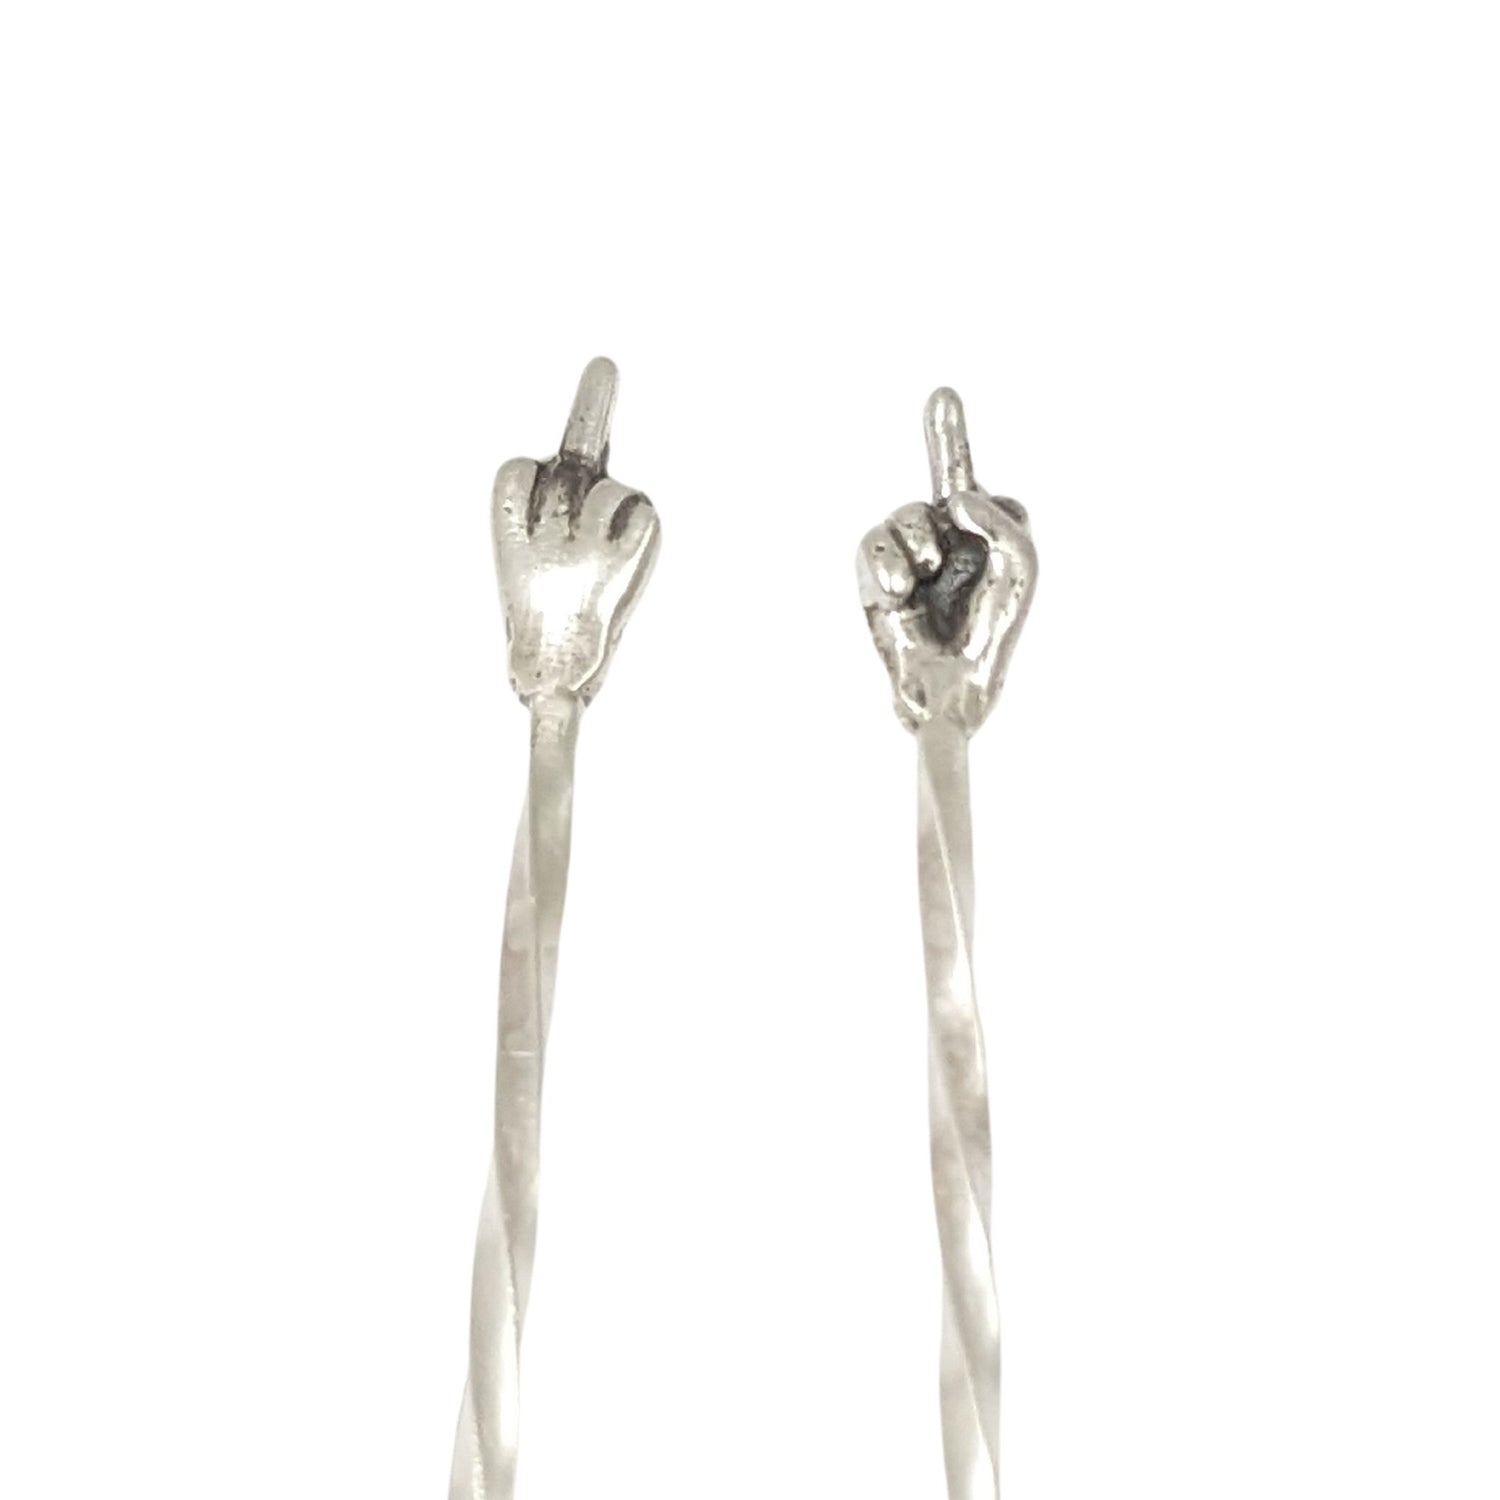 Pair of sterling silver cocktail picks. At the top is a hand with the middle finger raised, ie flipping the bird. One hand faces toward you, the other faces away.